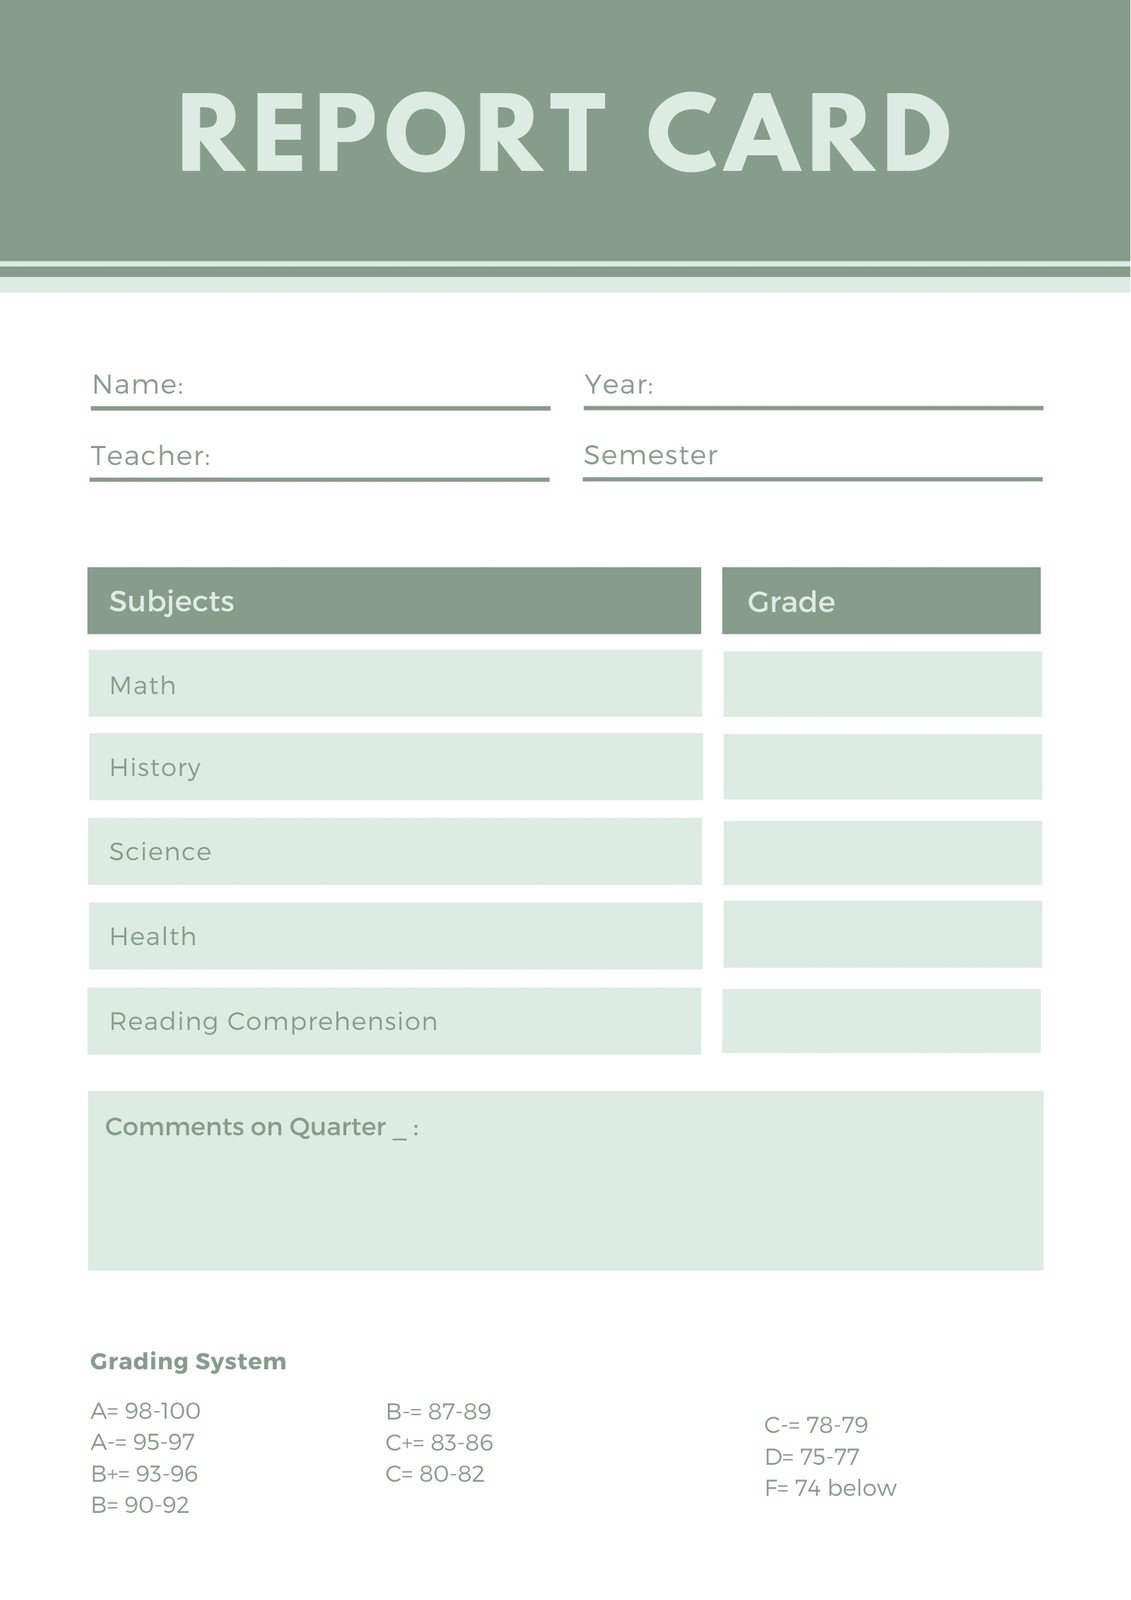 Free, printable, customizable report card templates  Canva Within Boyfriend Report Card Template